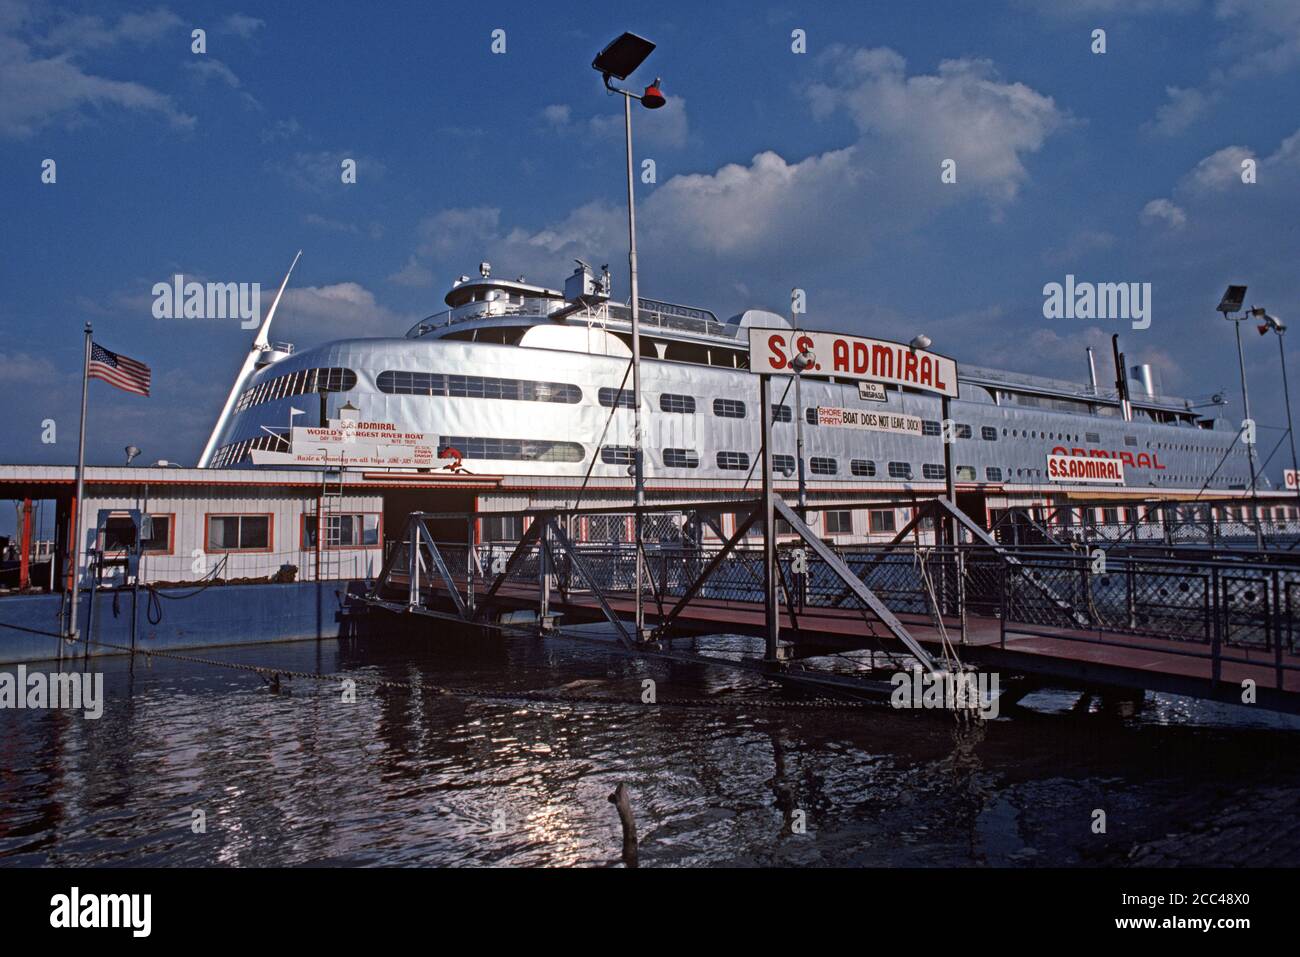 SS ADMIRAL STEAMBOAT ON THE MISSISSIPPI RIVER, ST LOUIS, MISSOURI, ÉTATS-UNIS, ANNÉES 70 Banque D'Images